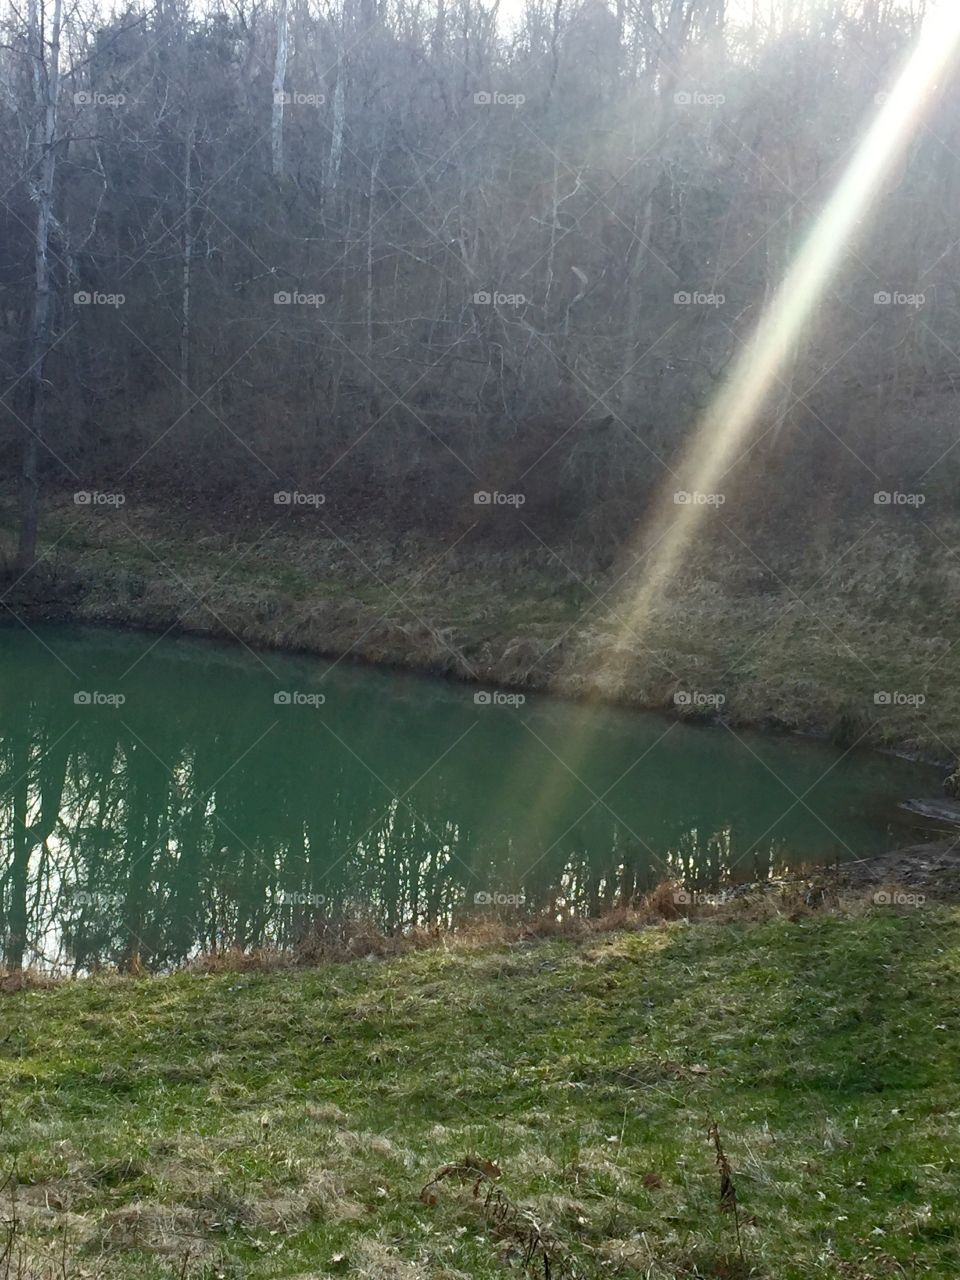 This was taken in New Richmond Ohio as the sun rose creating rays and reflecting into emerald color pond